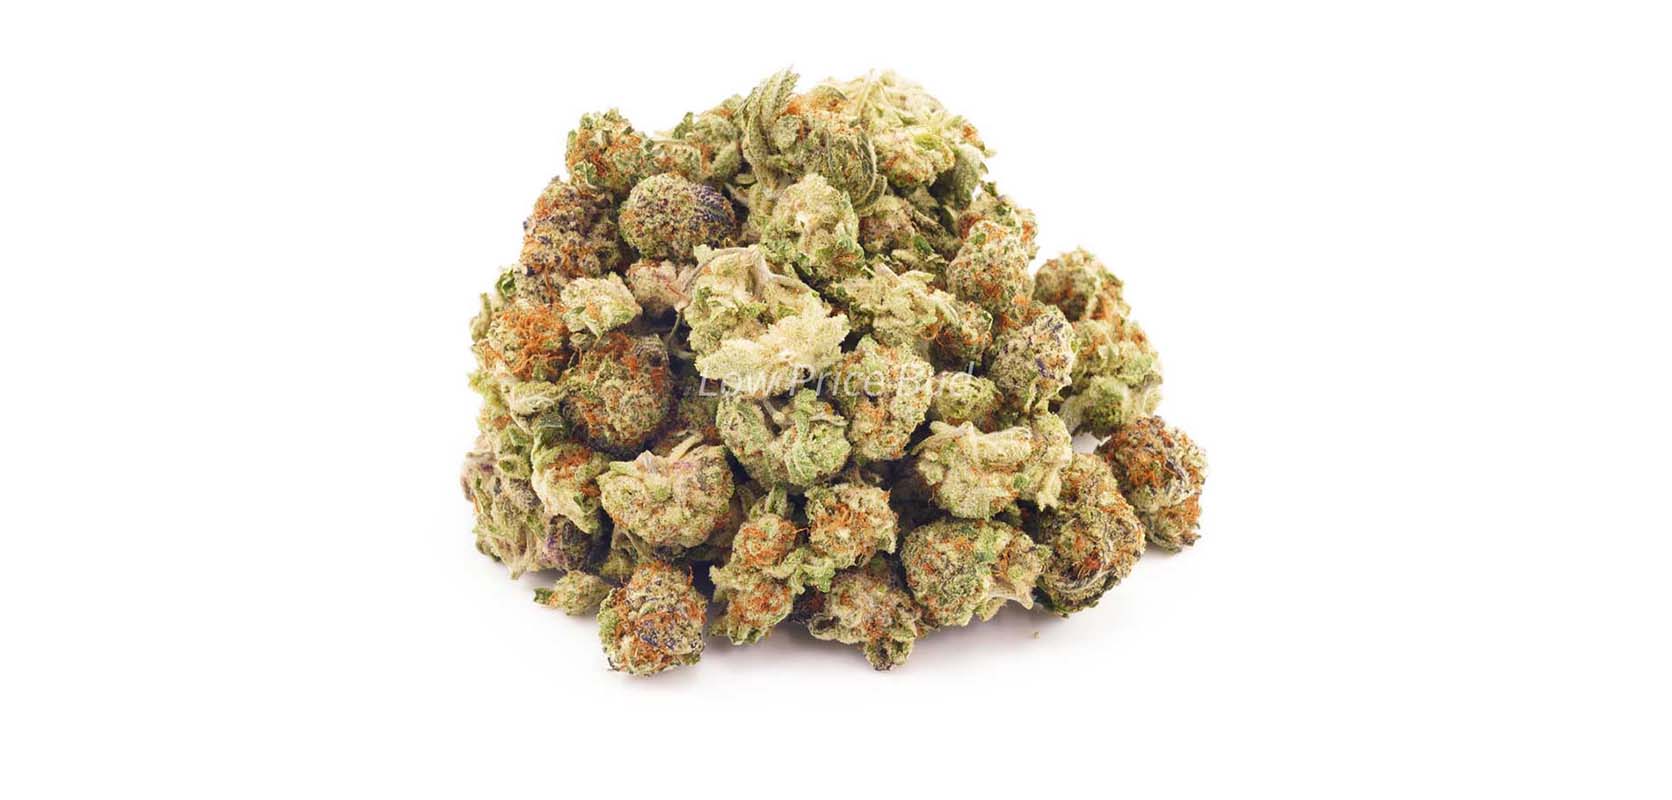 Sour Patch Kids weed online Canada from online dispensary for cheap weed Low Price Bud.